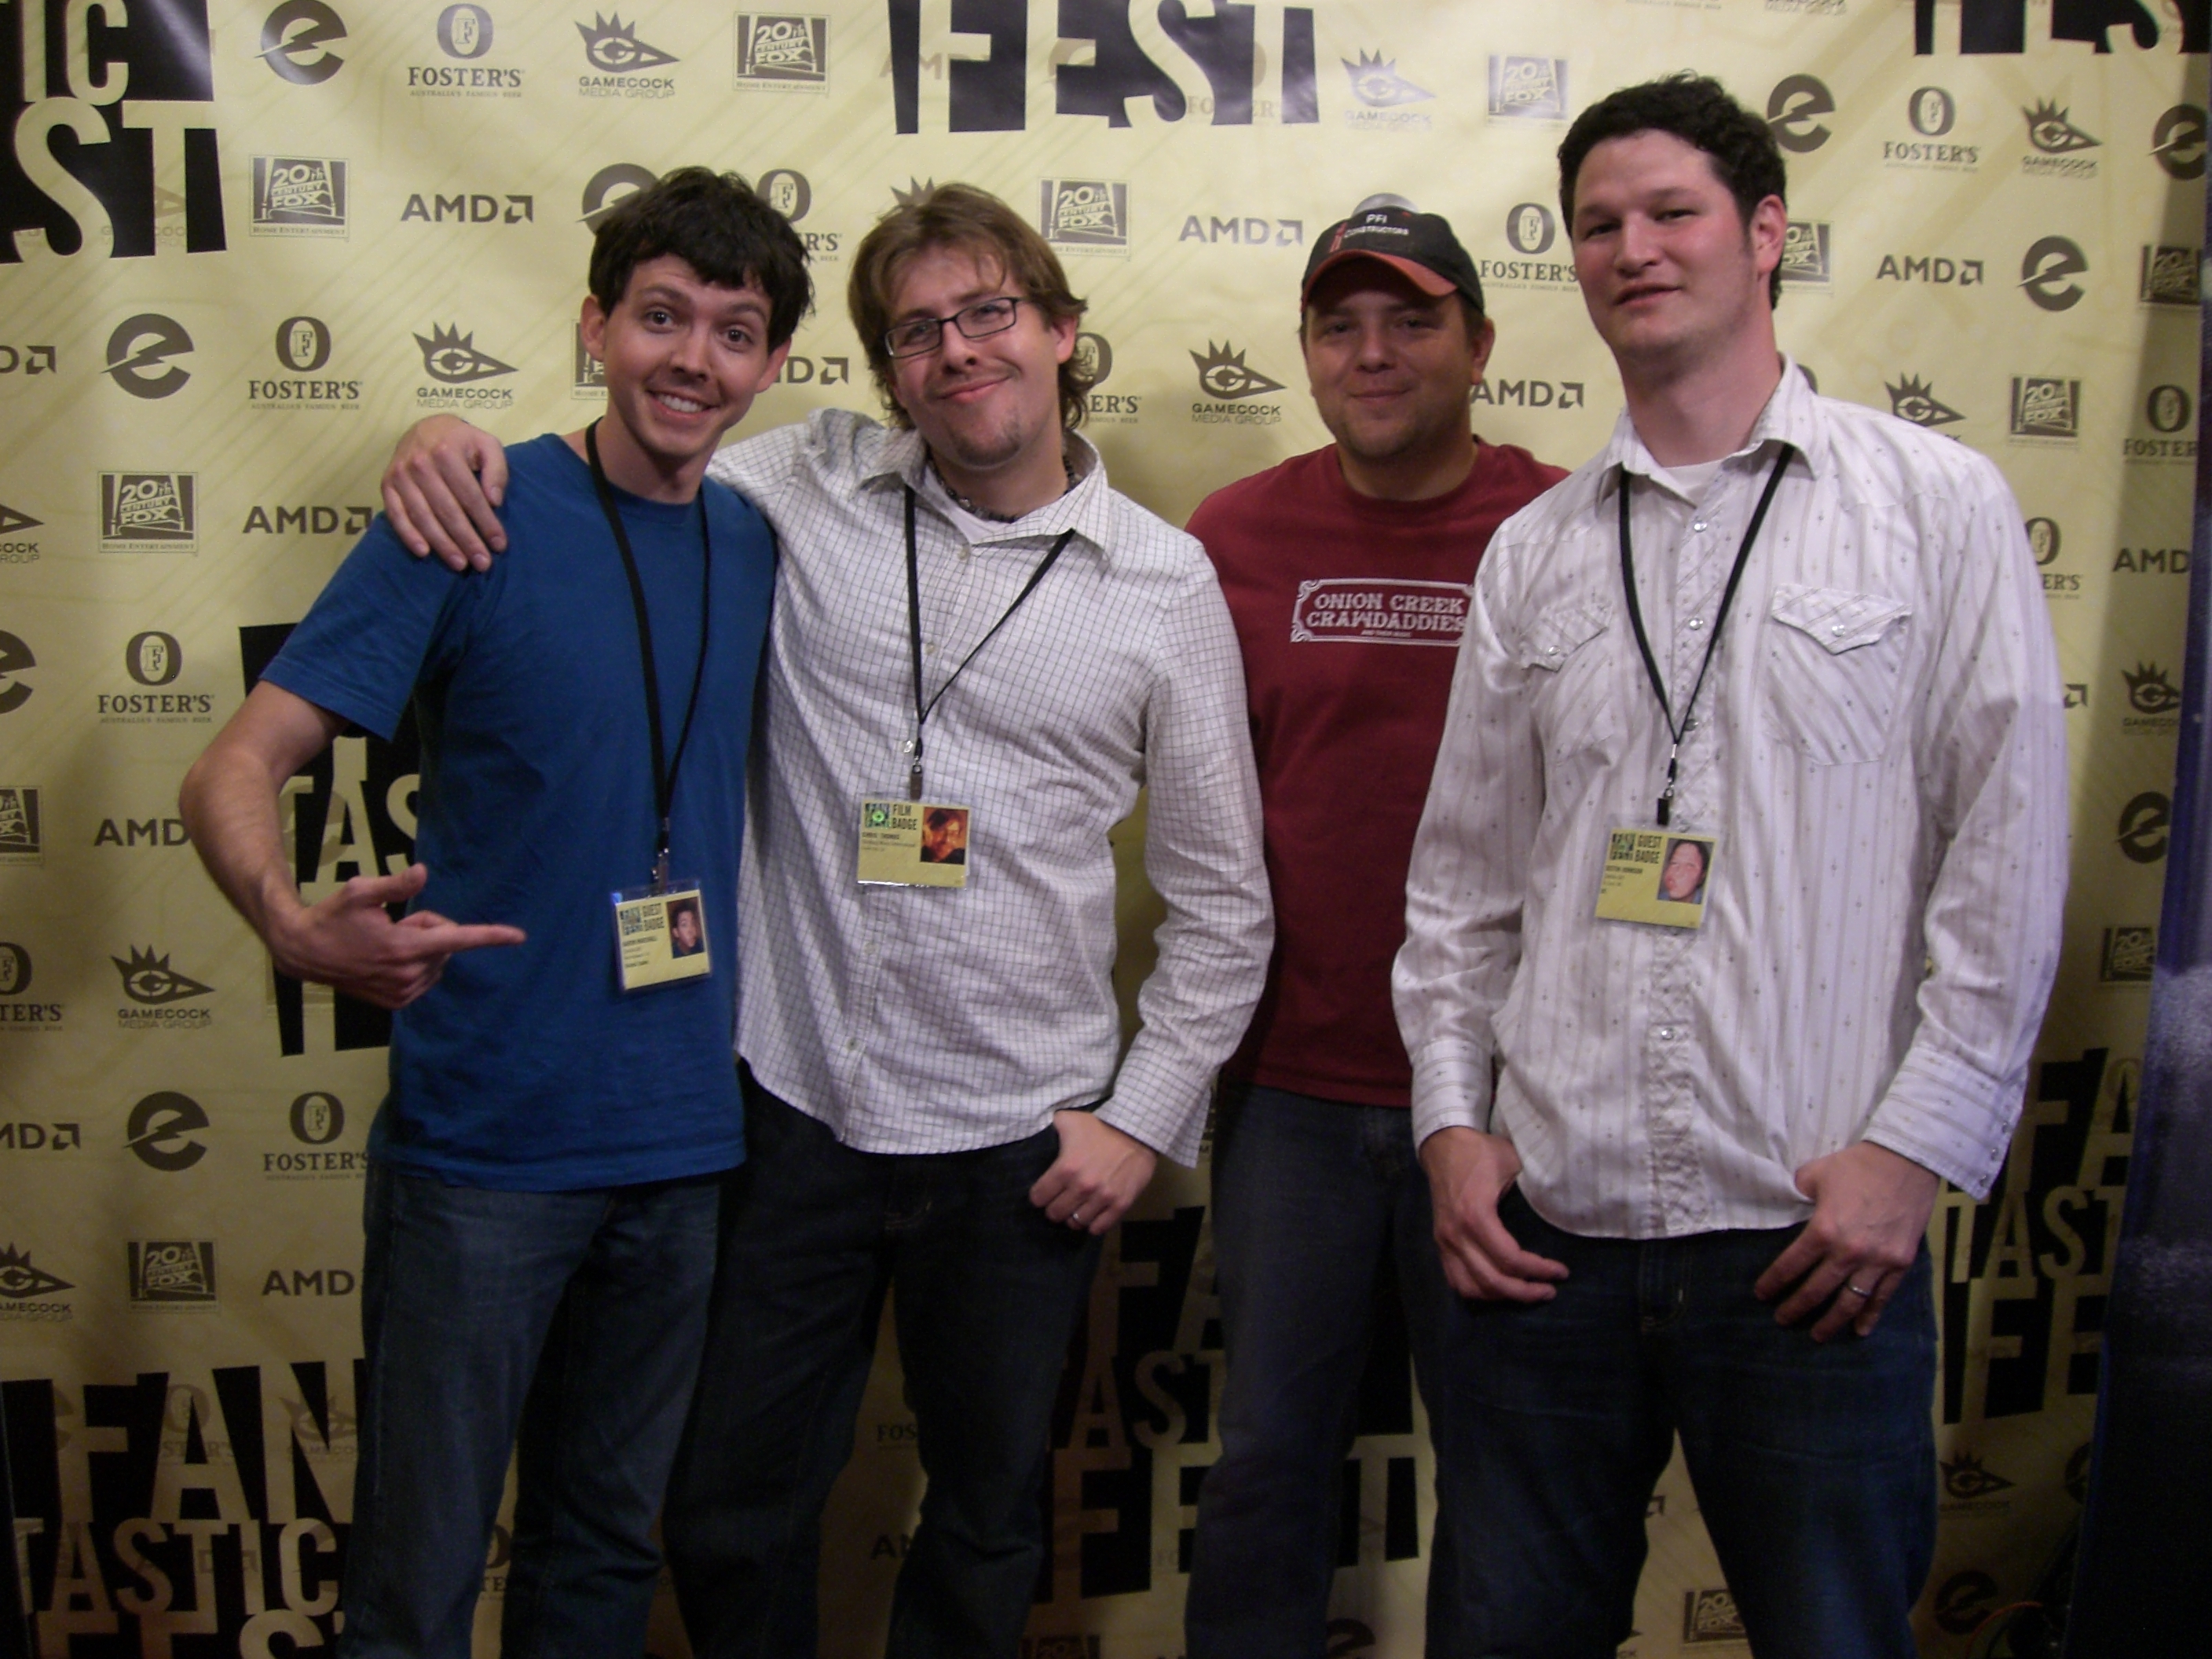 Chris Thomas at Fantastic Fest Film Festival (with Zombie Girl directors)